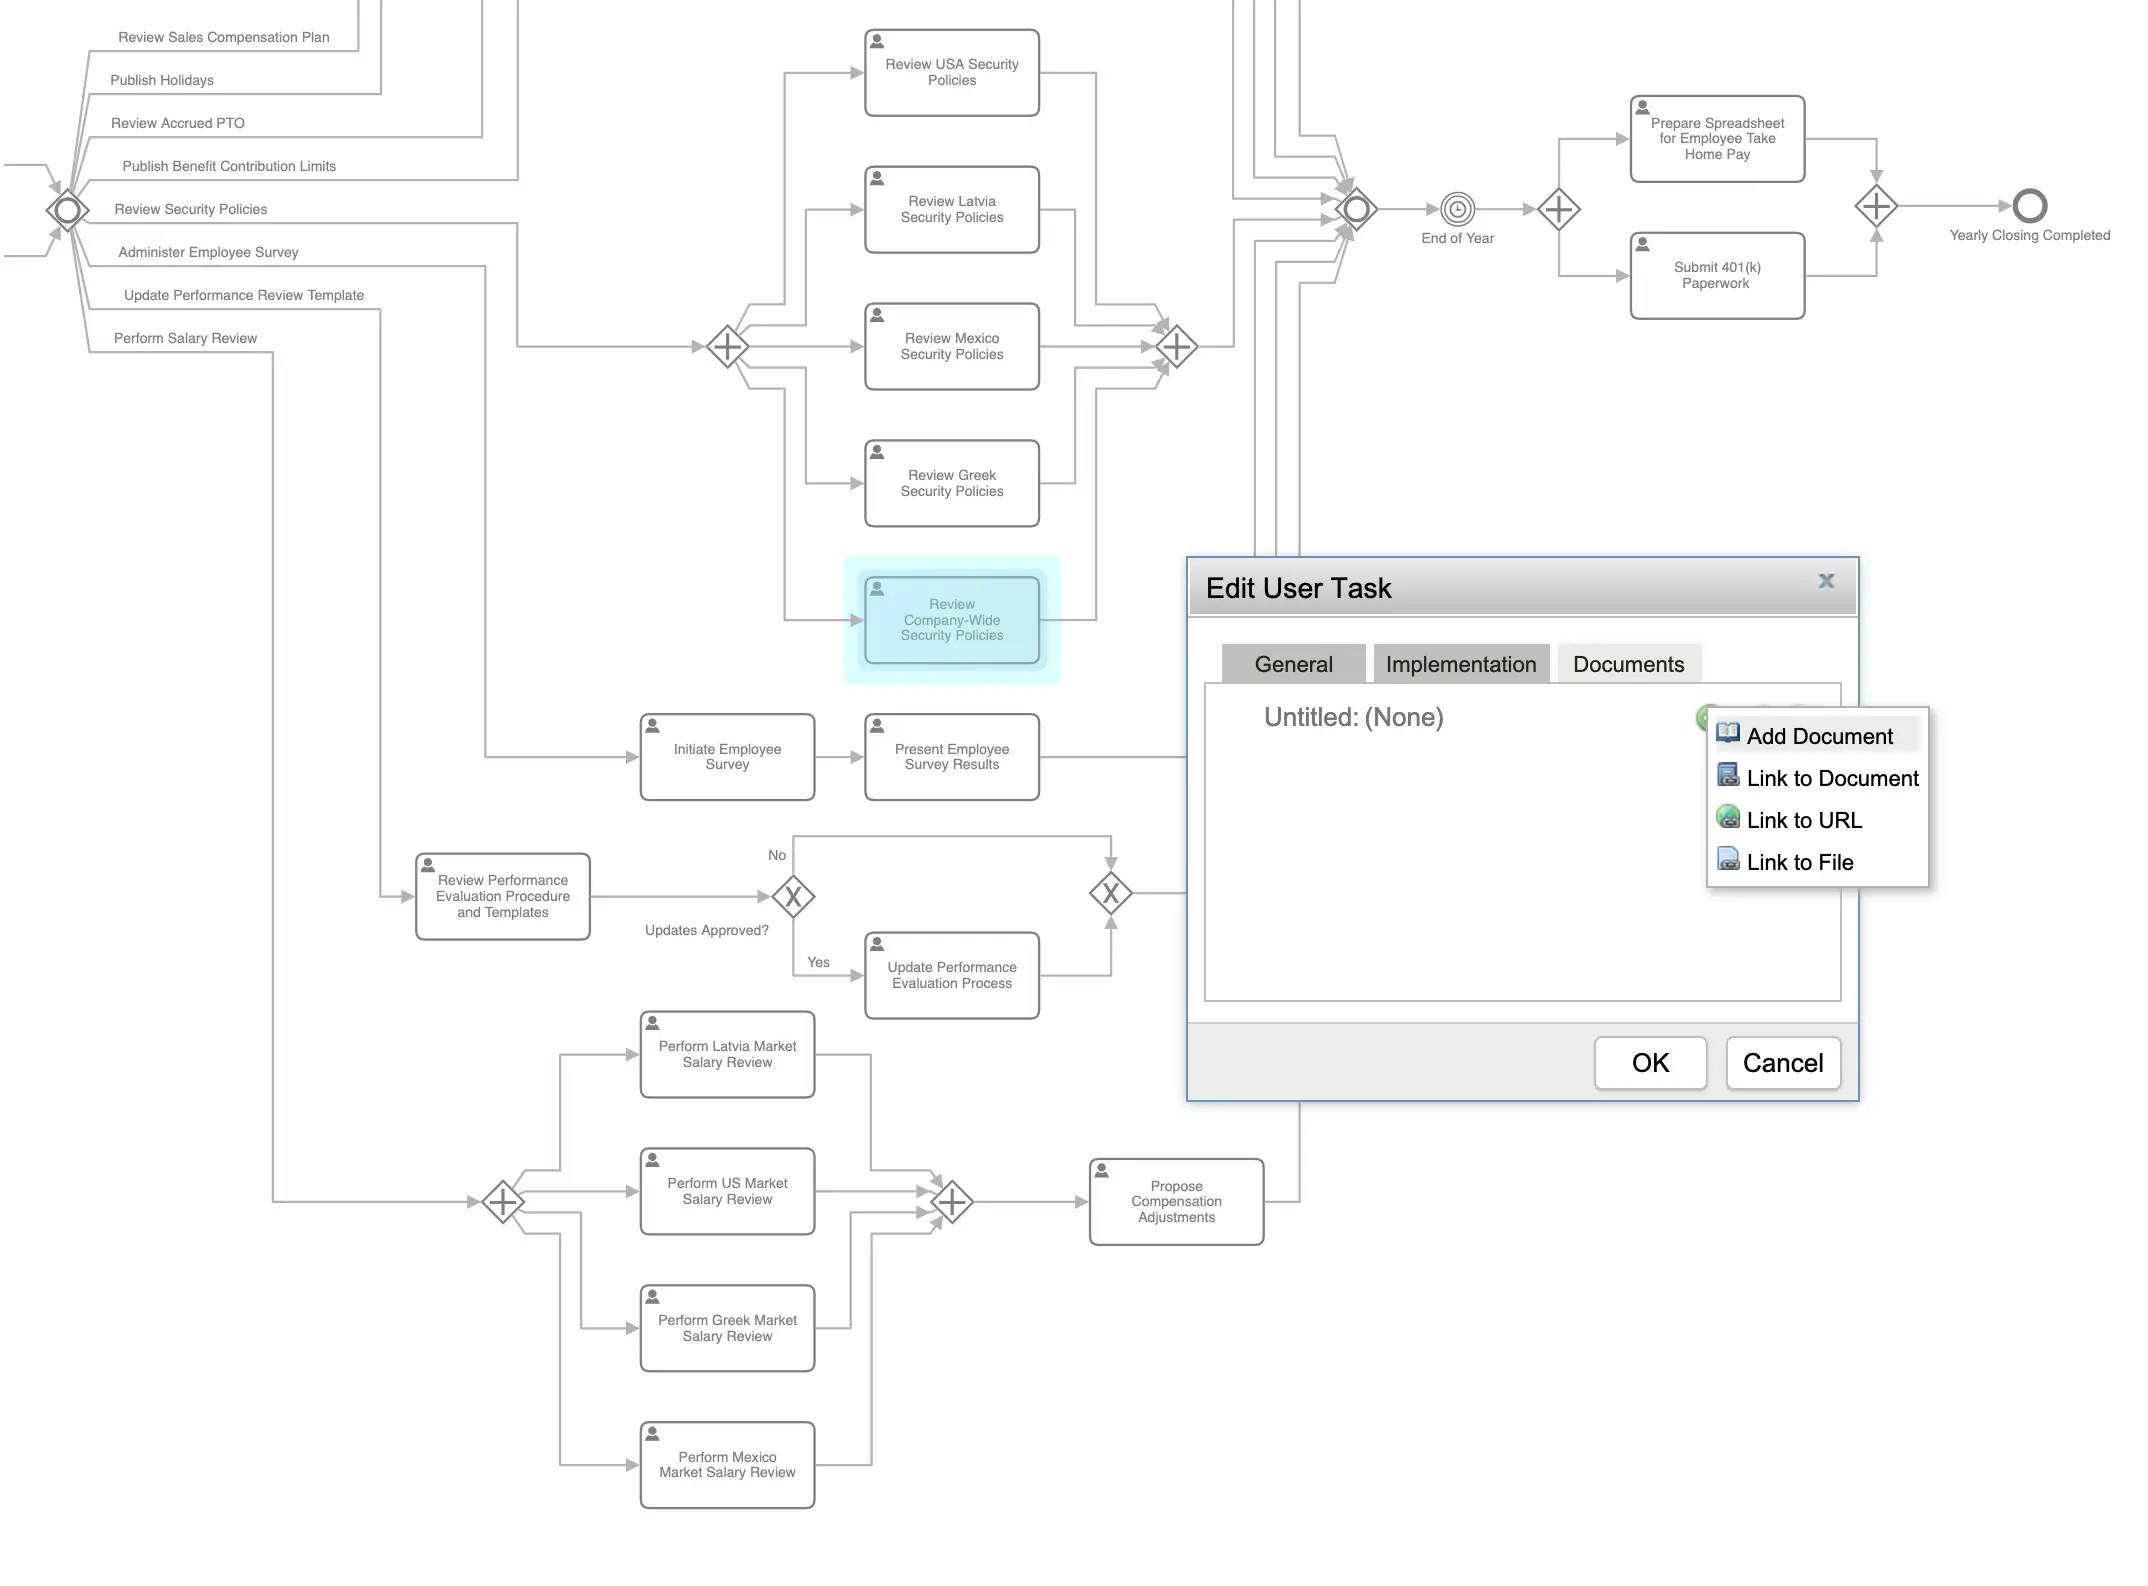 Link documents and URLs to tasks in the Business Process Modeling module